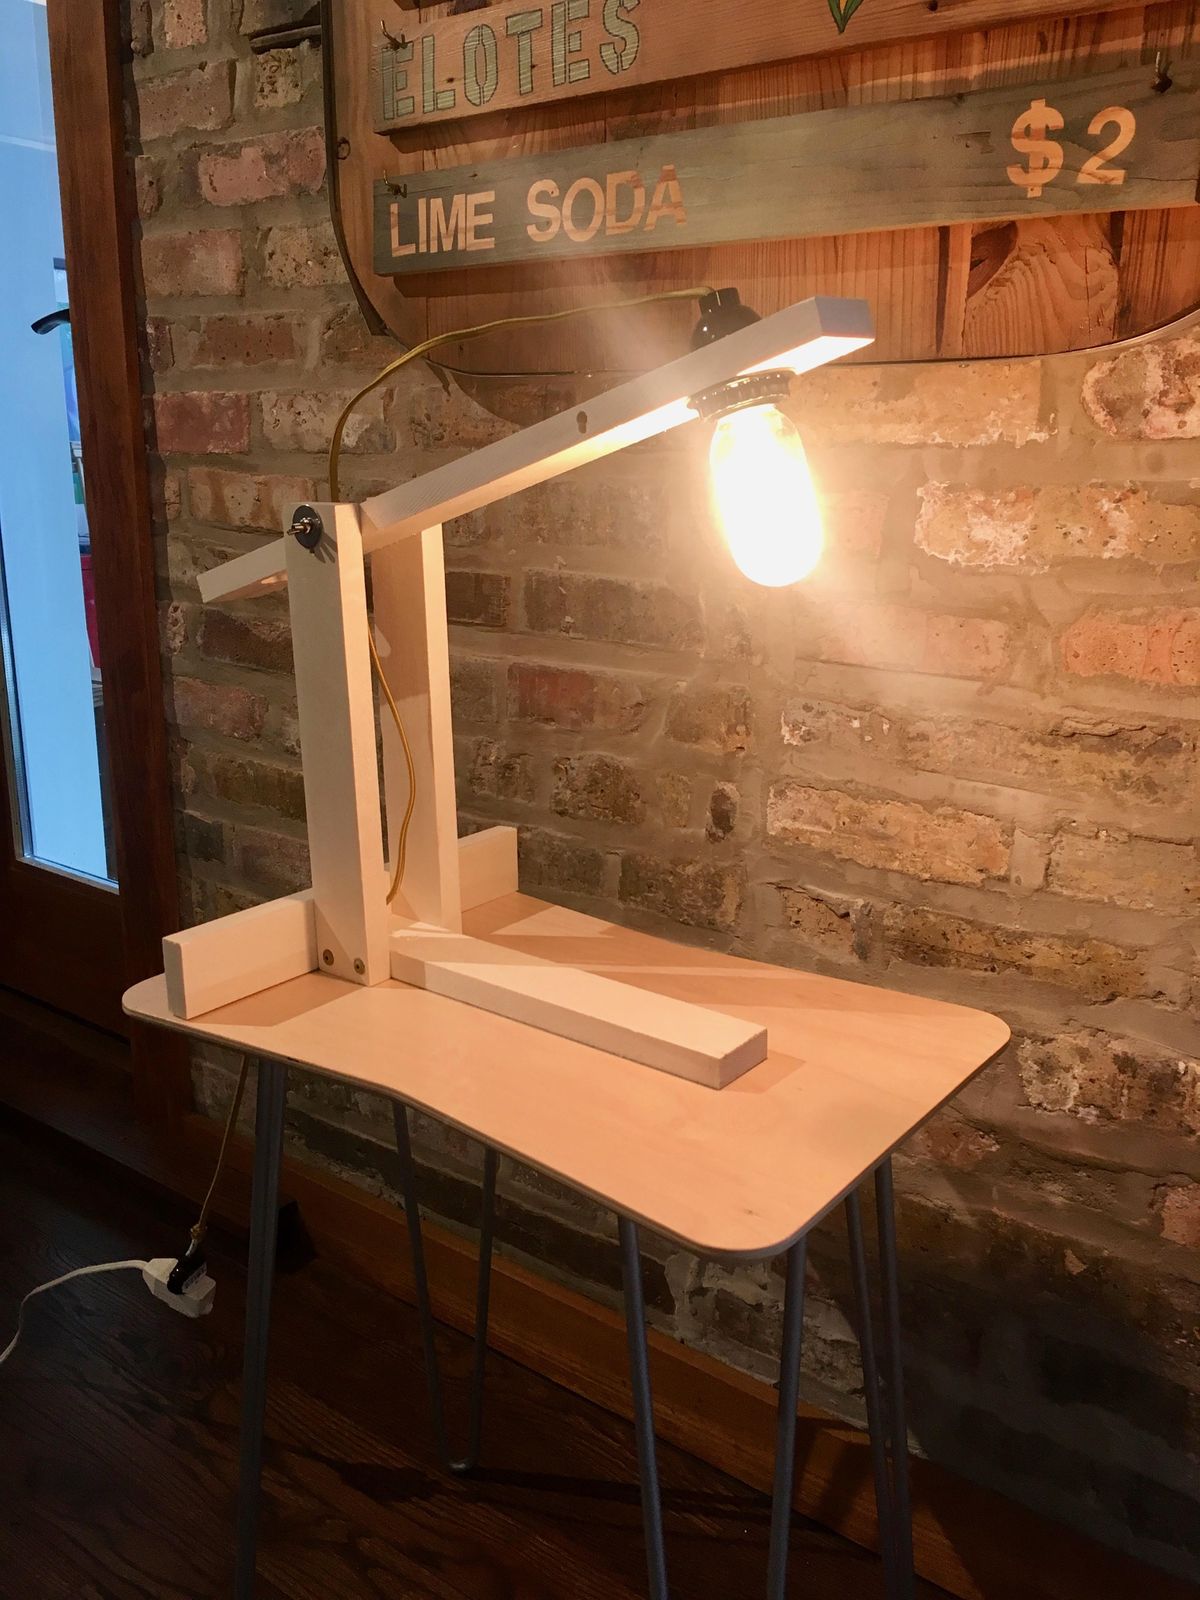 Creative Reuse: Make a Lamp out of ANYTHING!